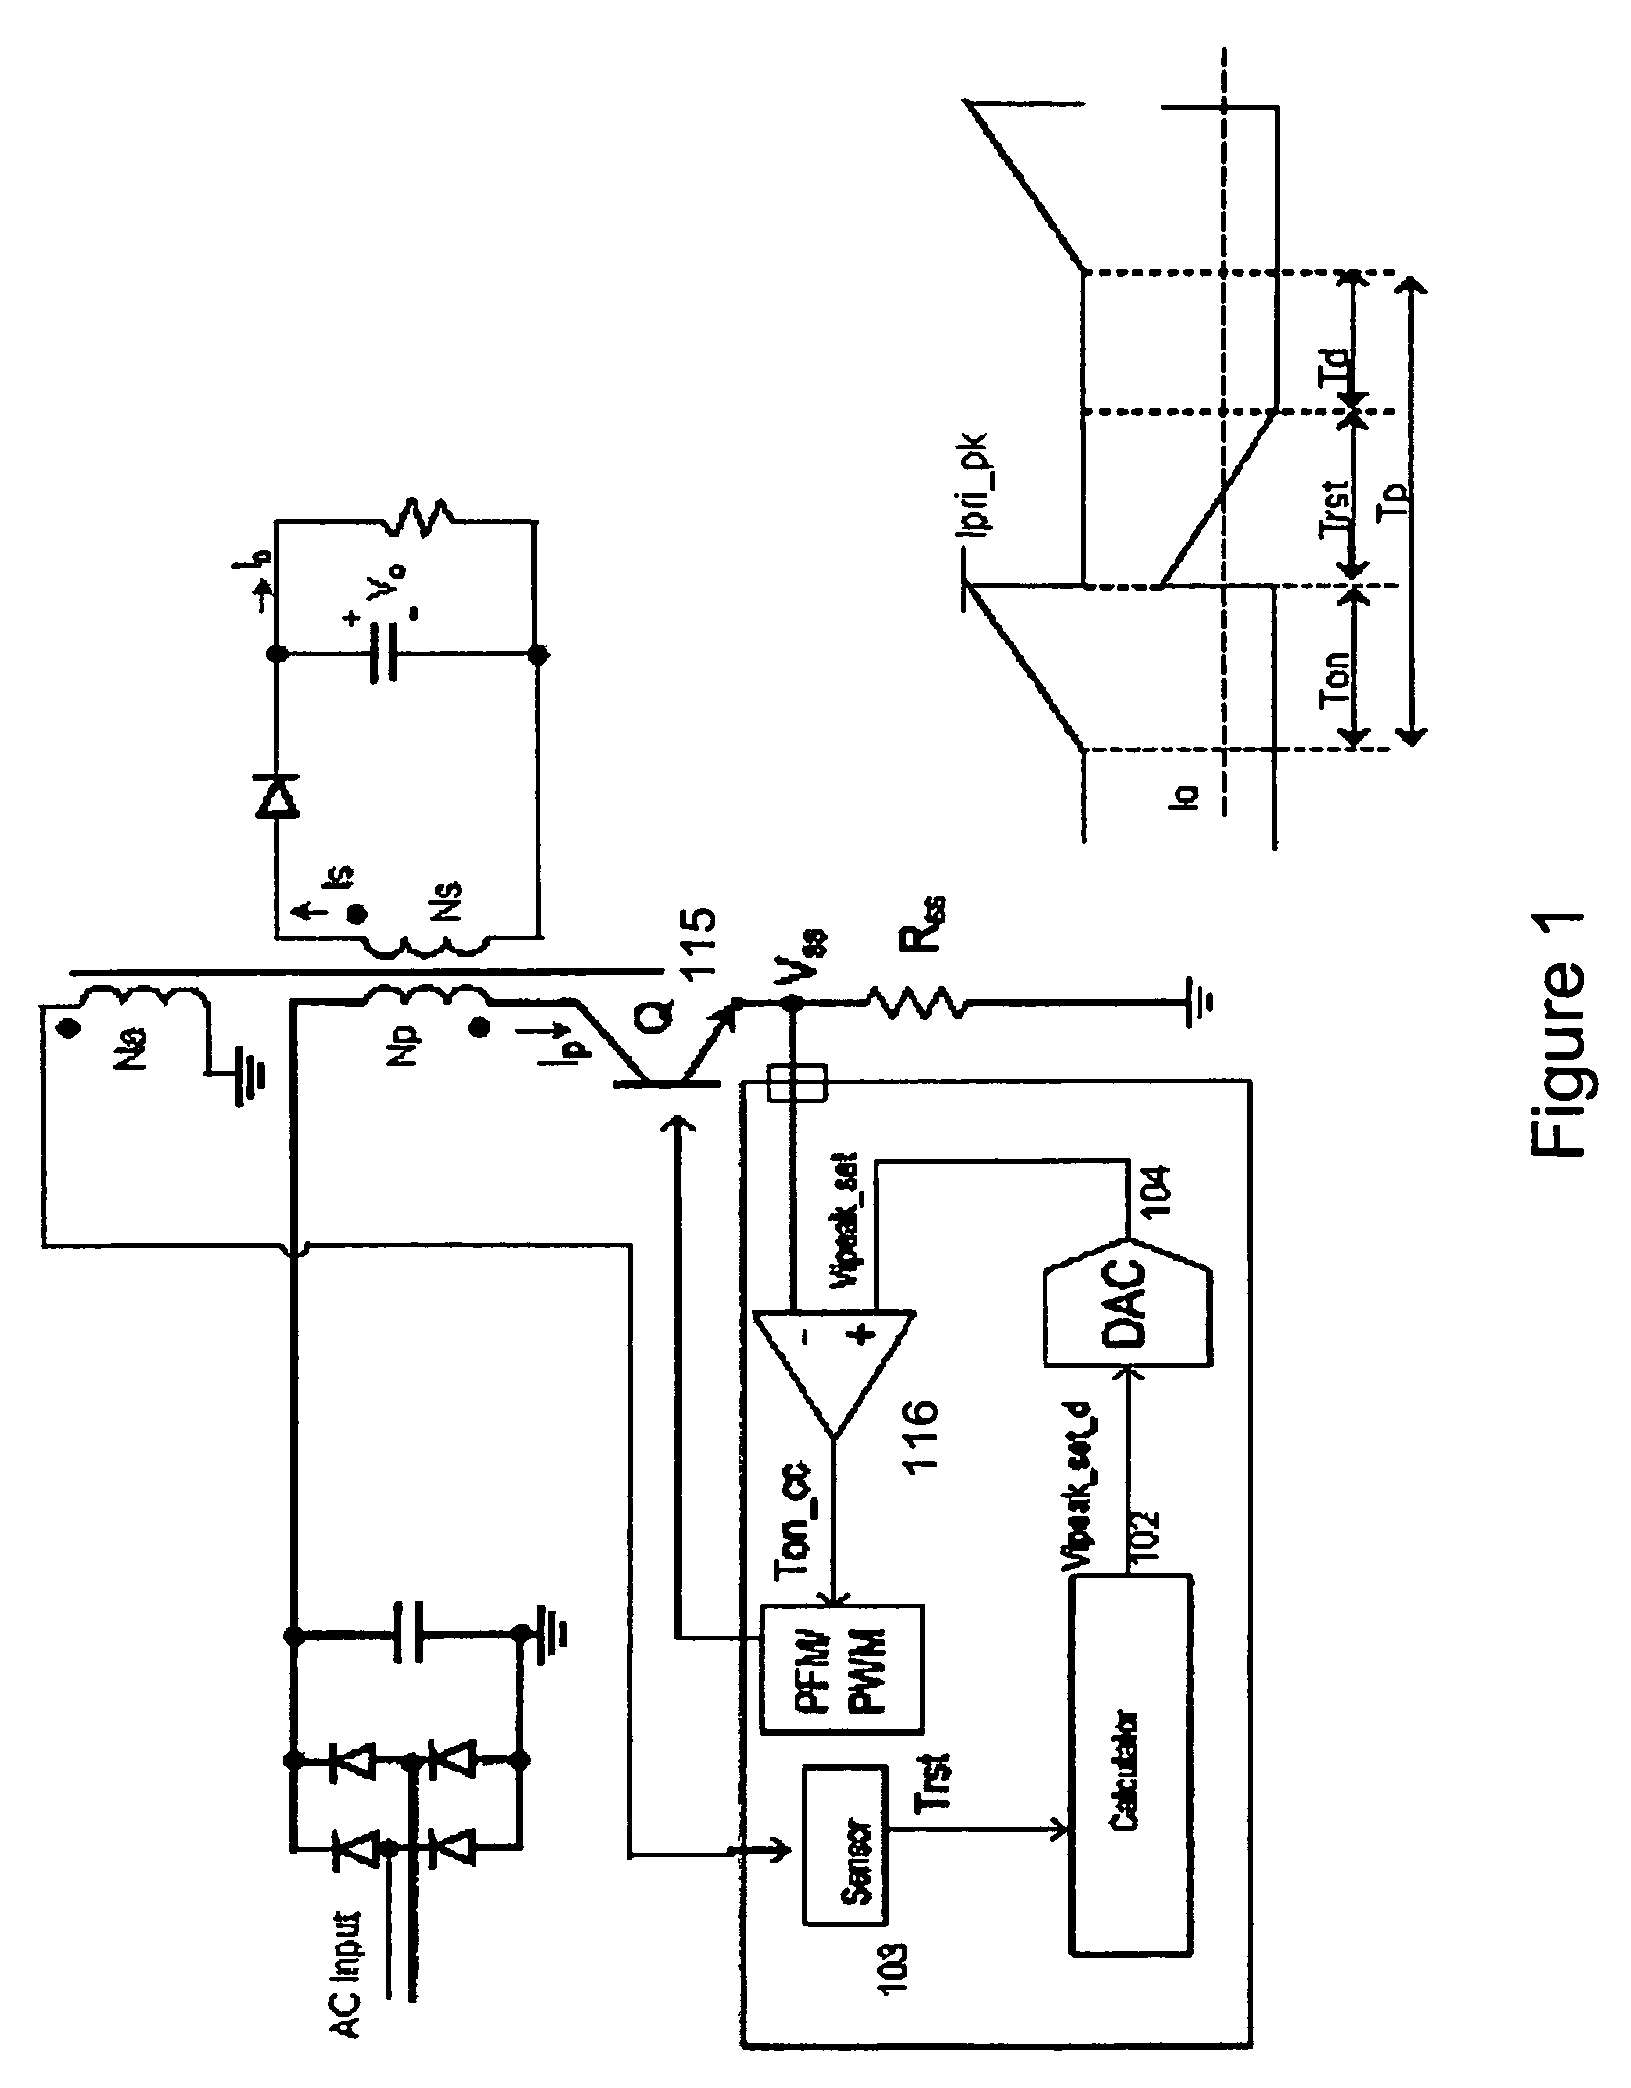 System and method for controlling a current limit with primary side sensing using a hybrid PWM and PFM control